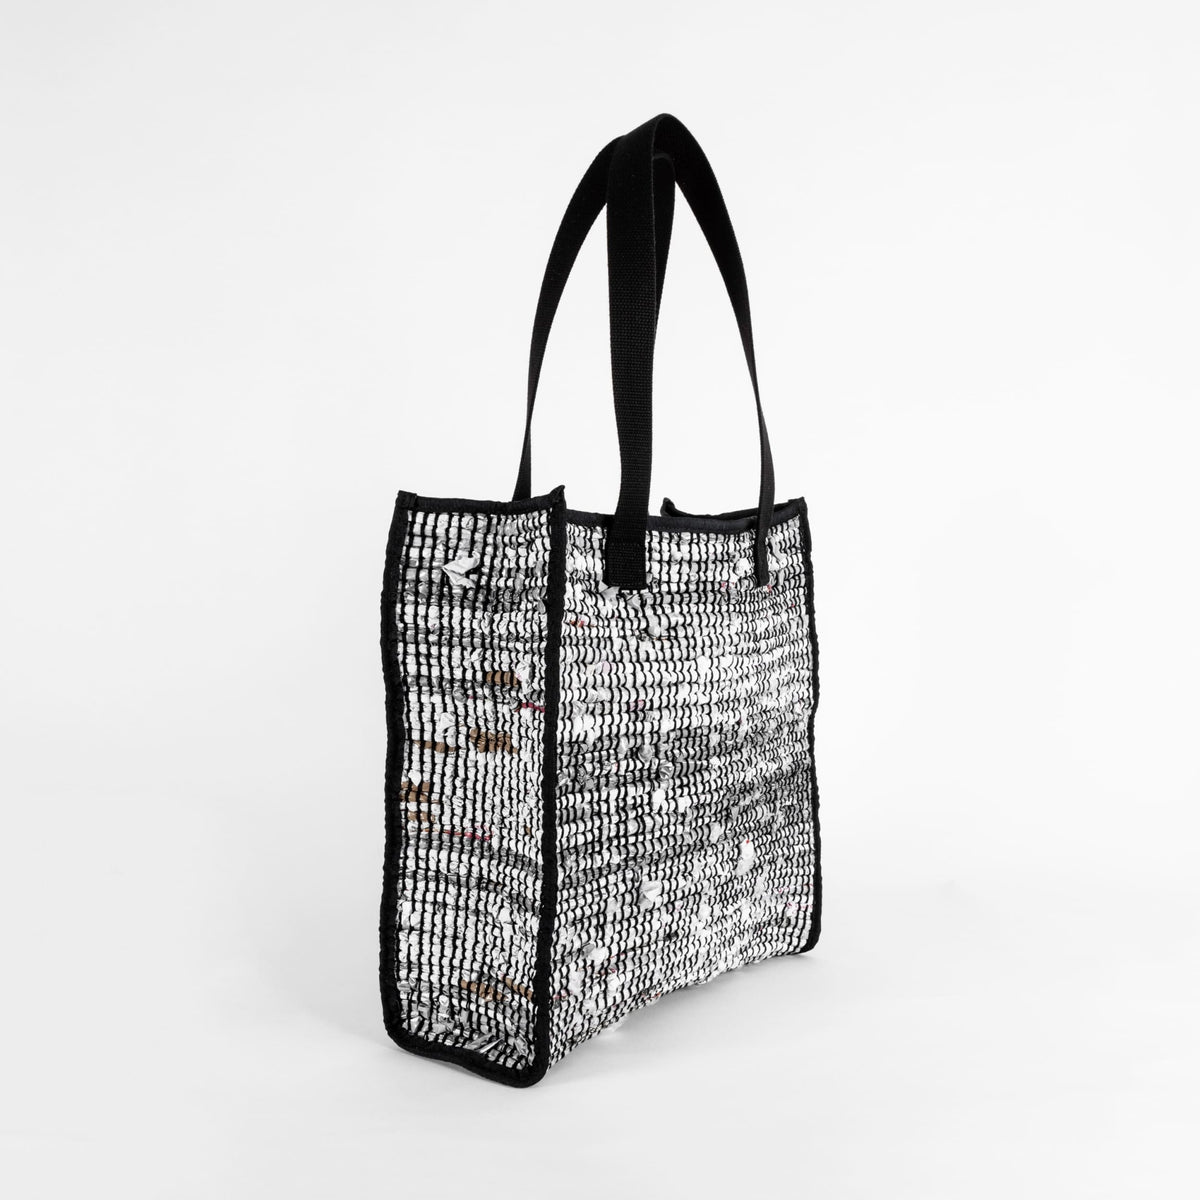 aNYbag - Custom made Plastic Bags | Made By Alex New York Made in USA